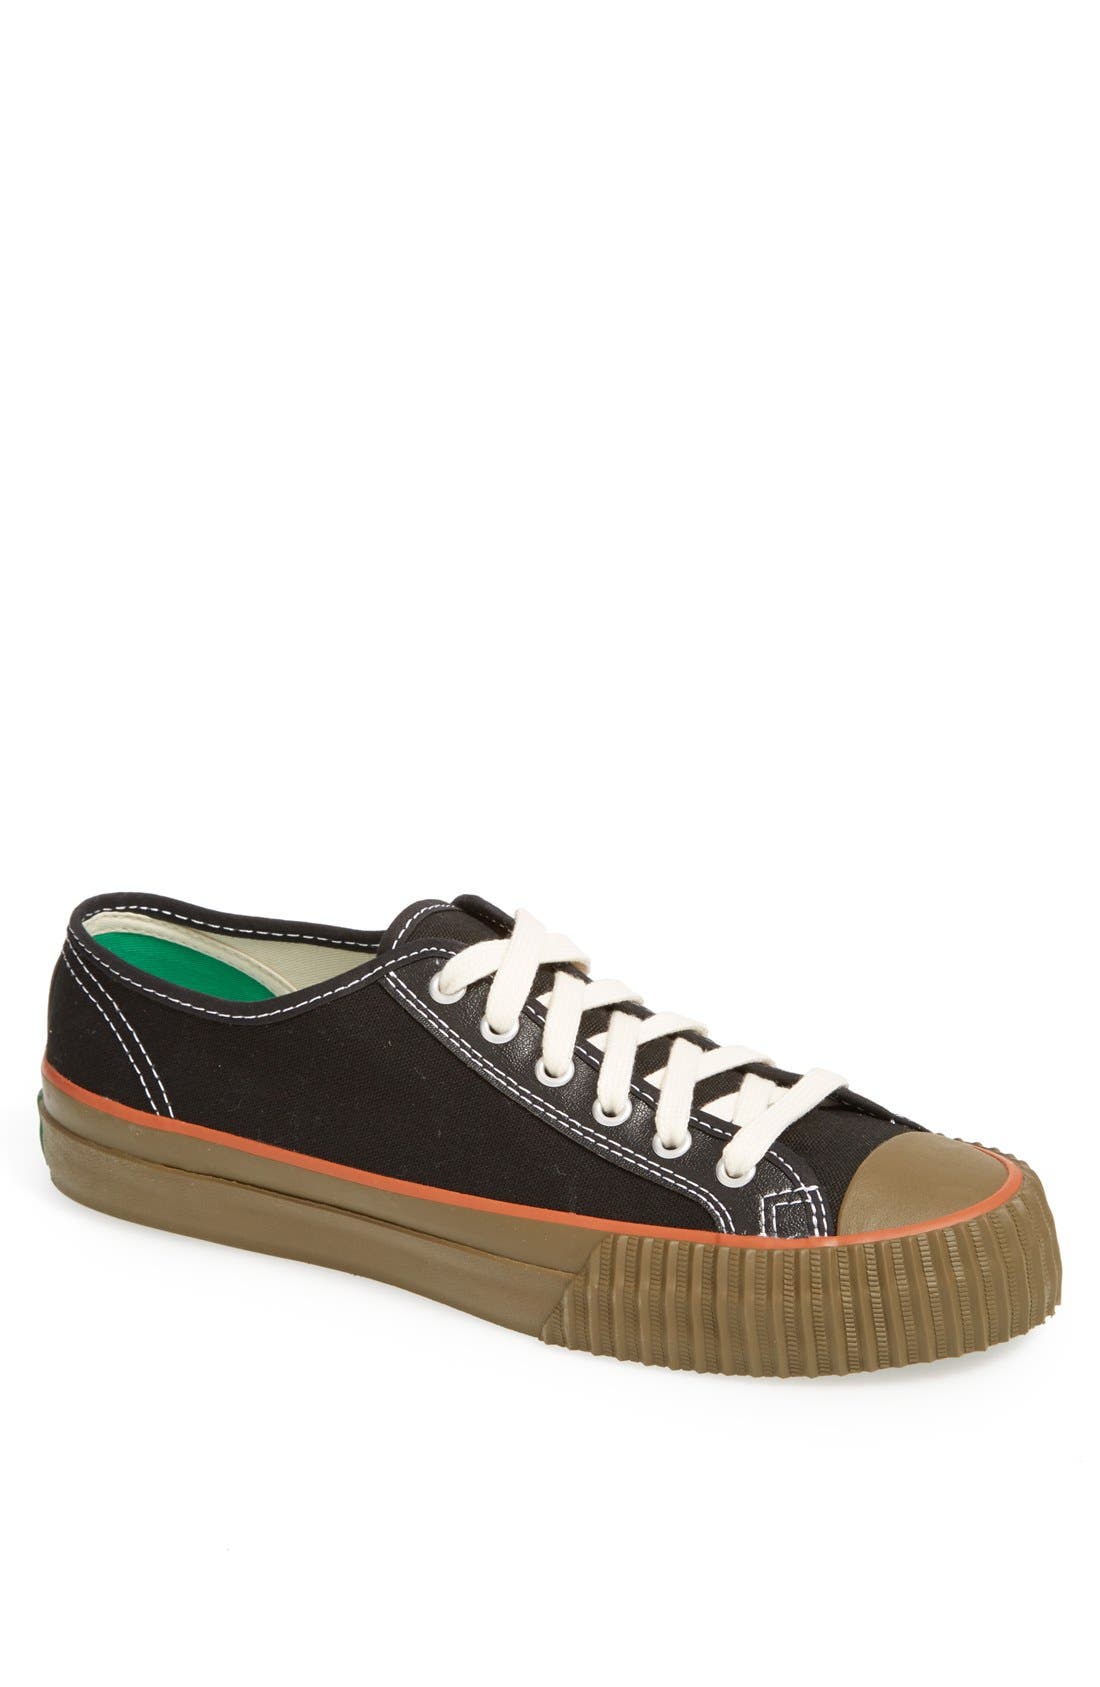 pf flyers arch support